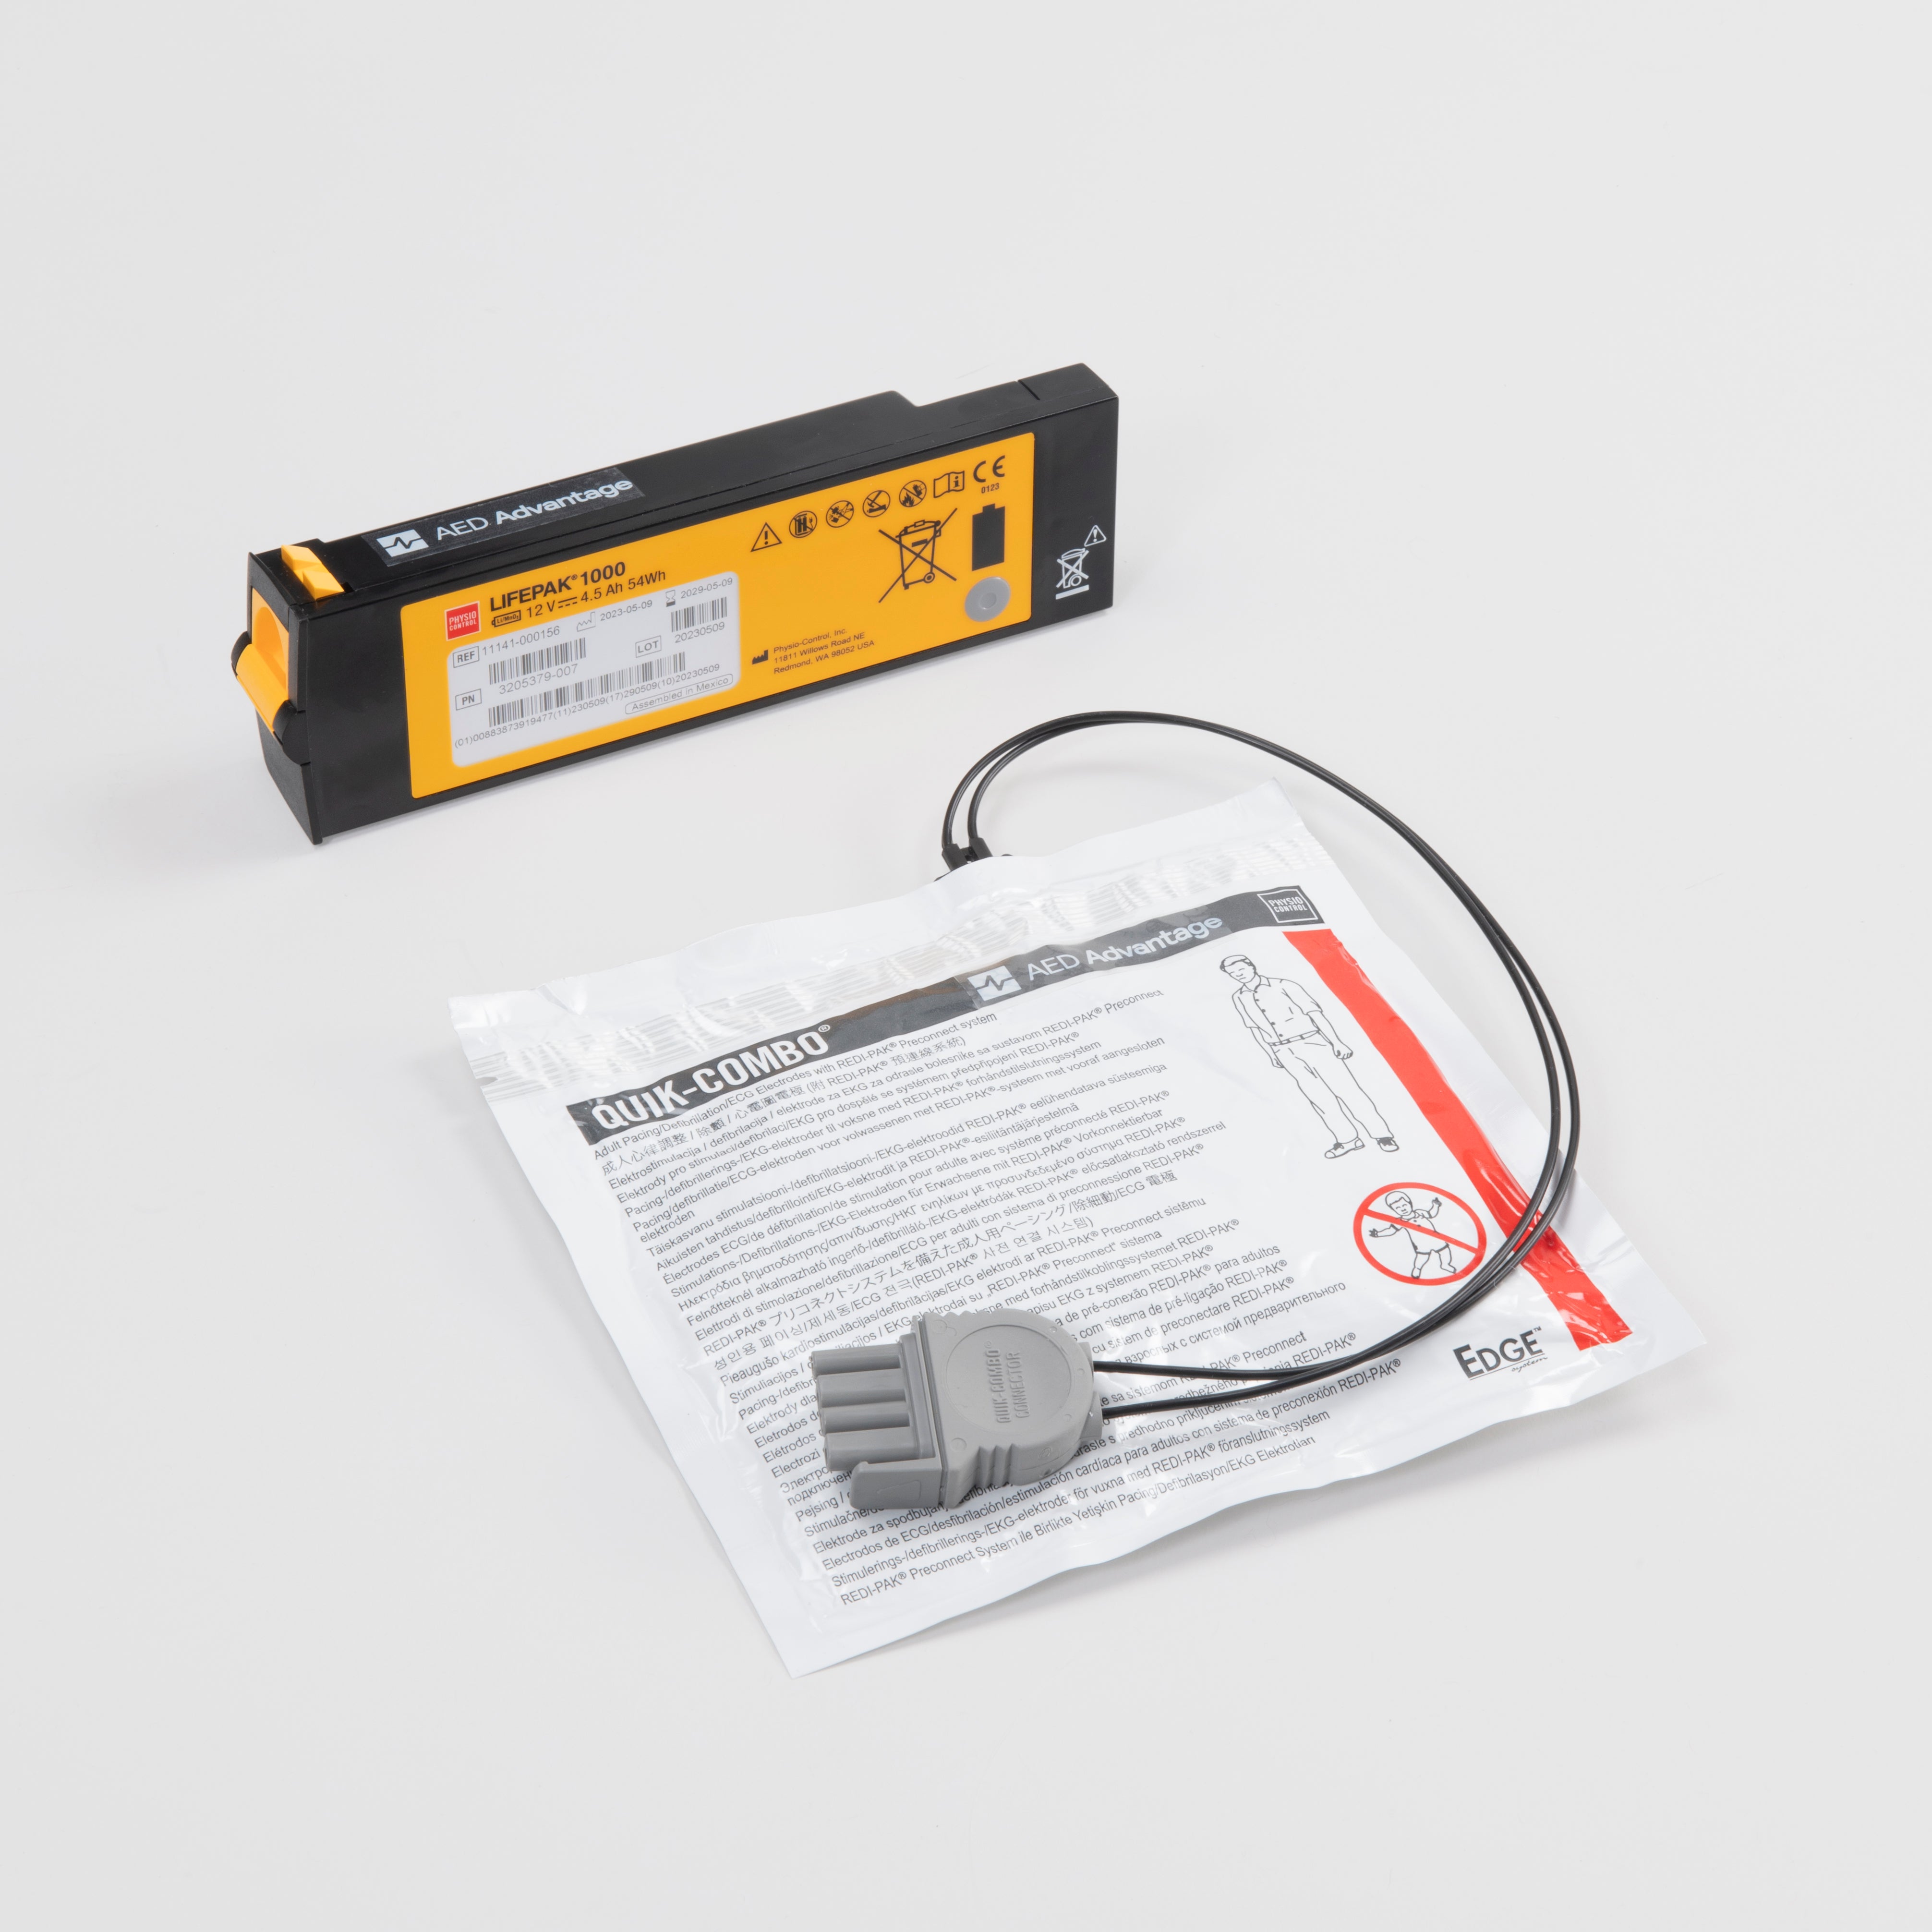 White electrodes package and black and yellow battery for the LIFEPAK 1000 defibrillator